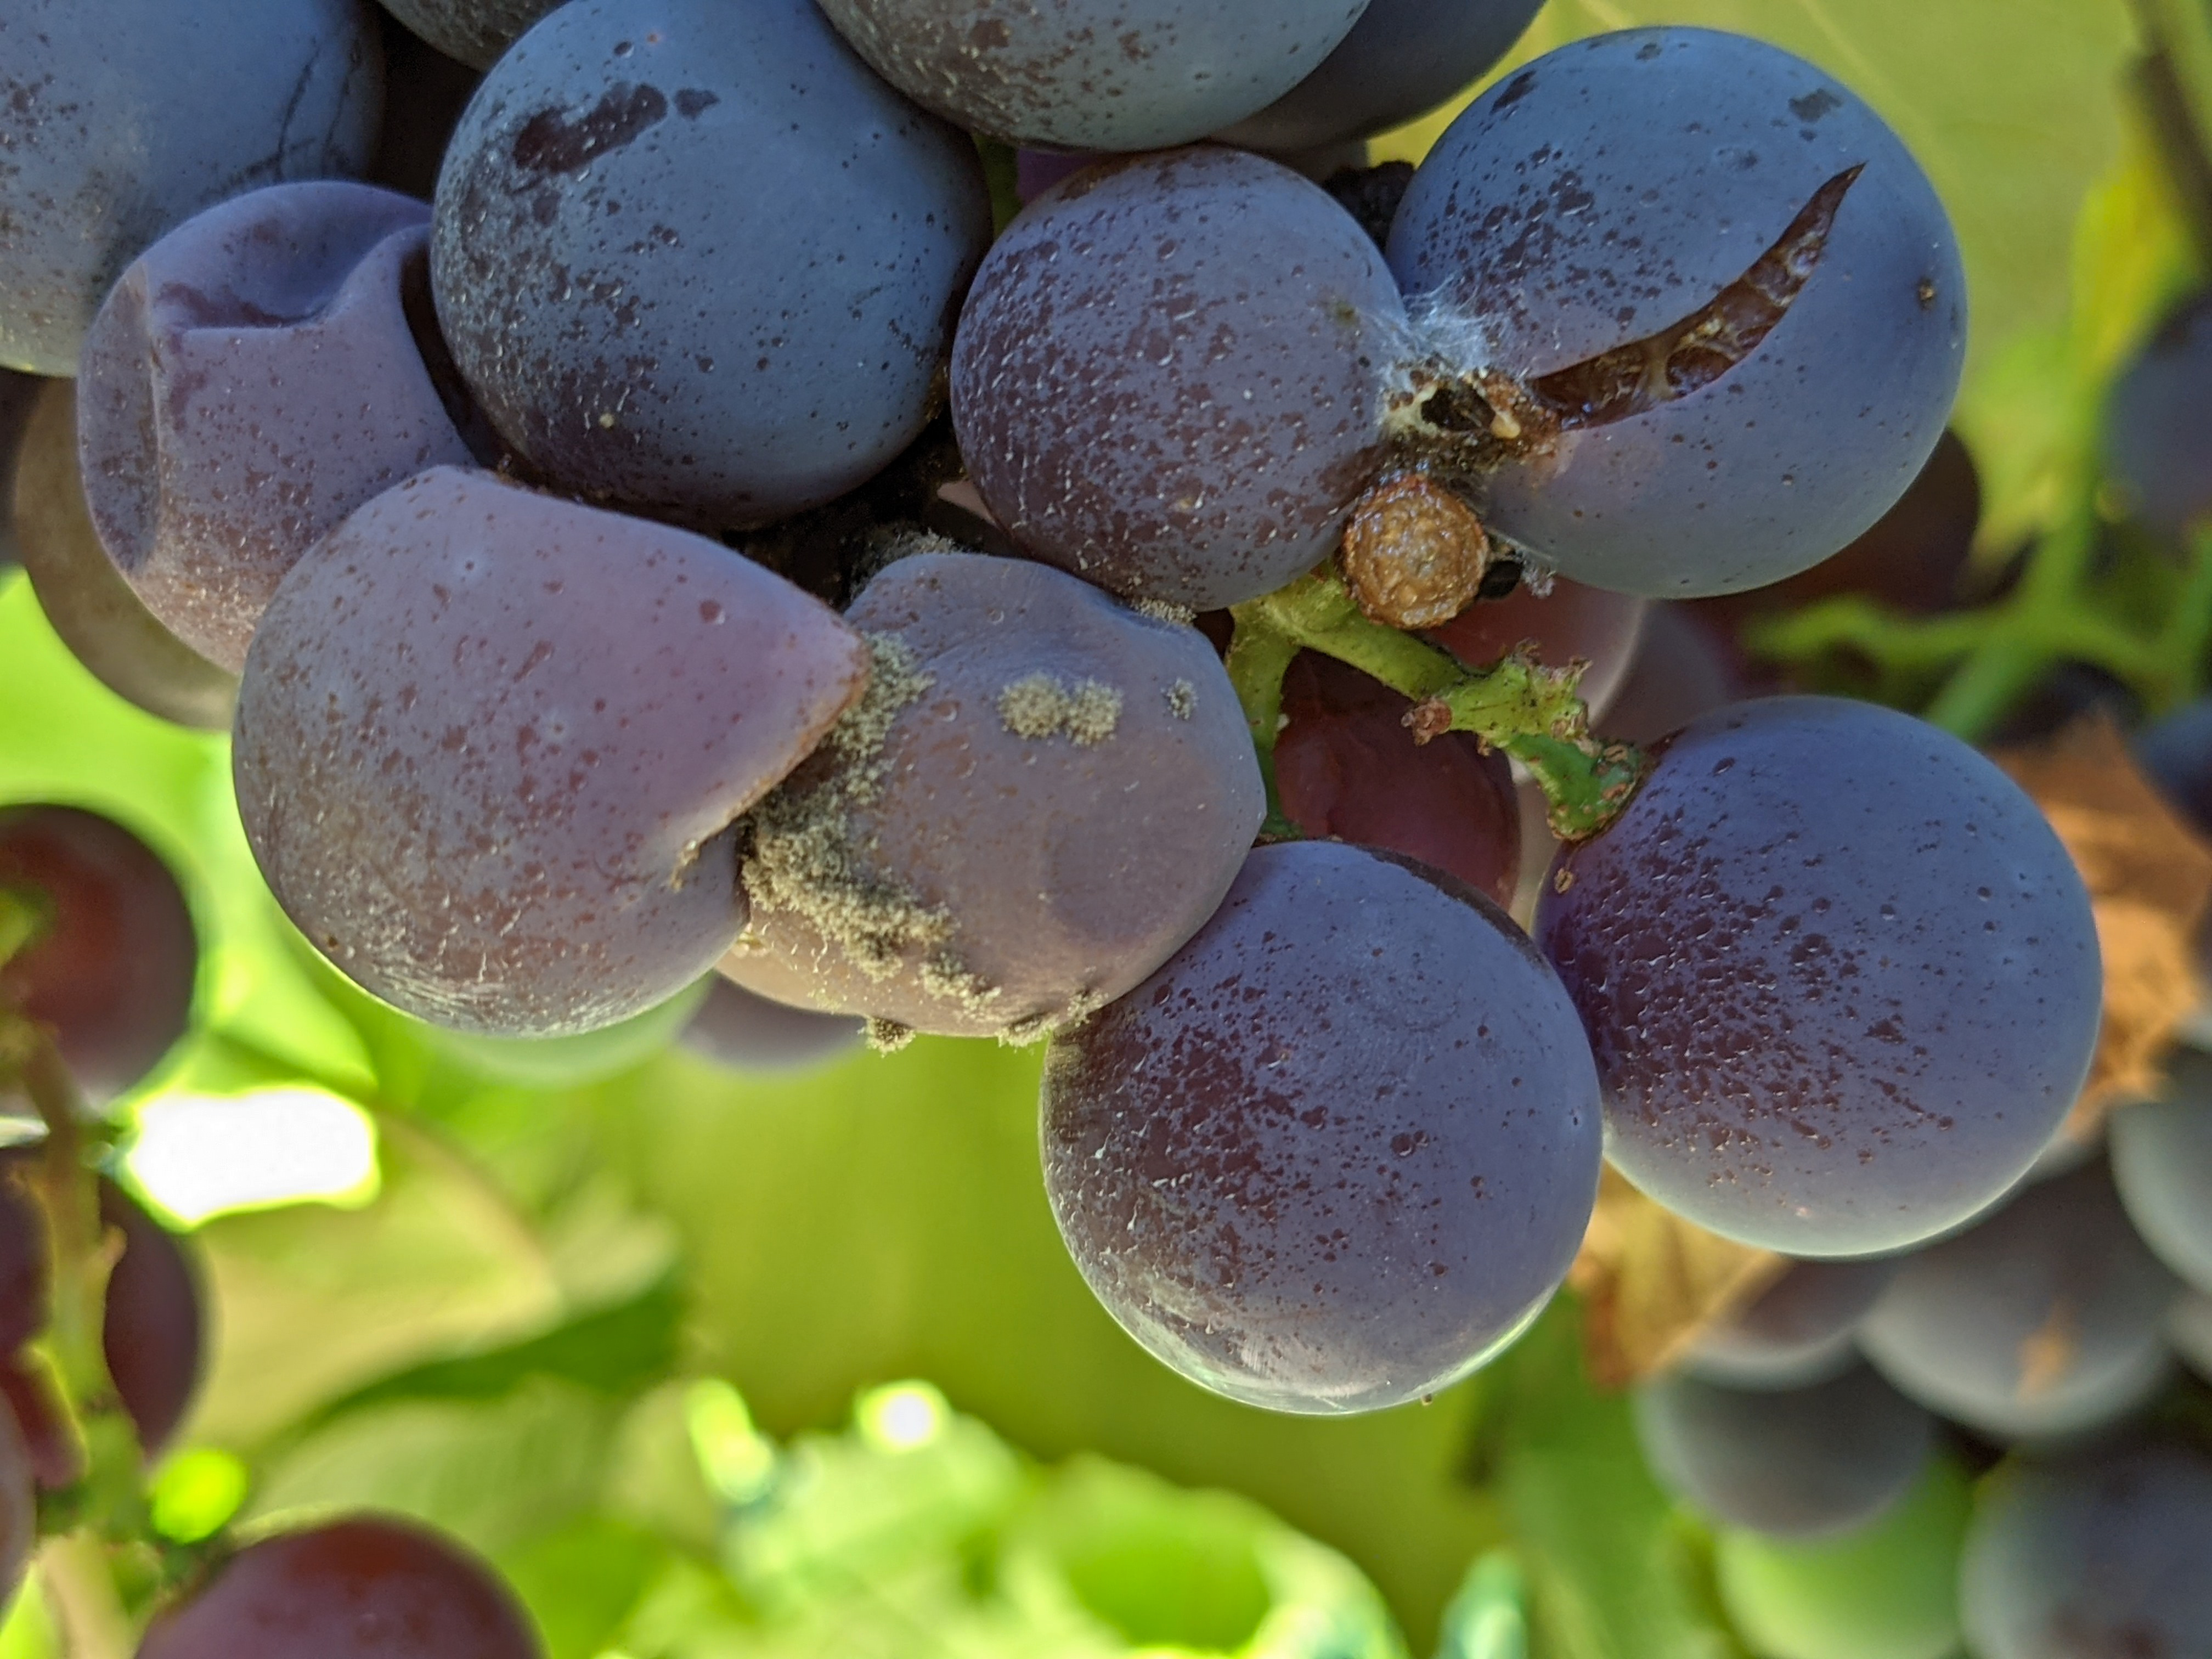 Botrytis on grapes.